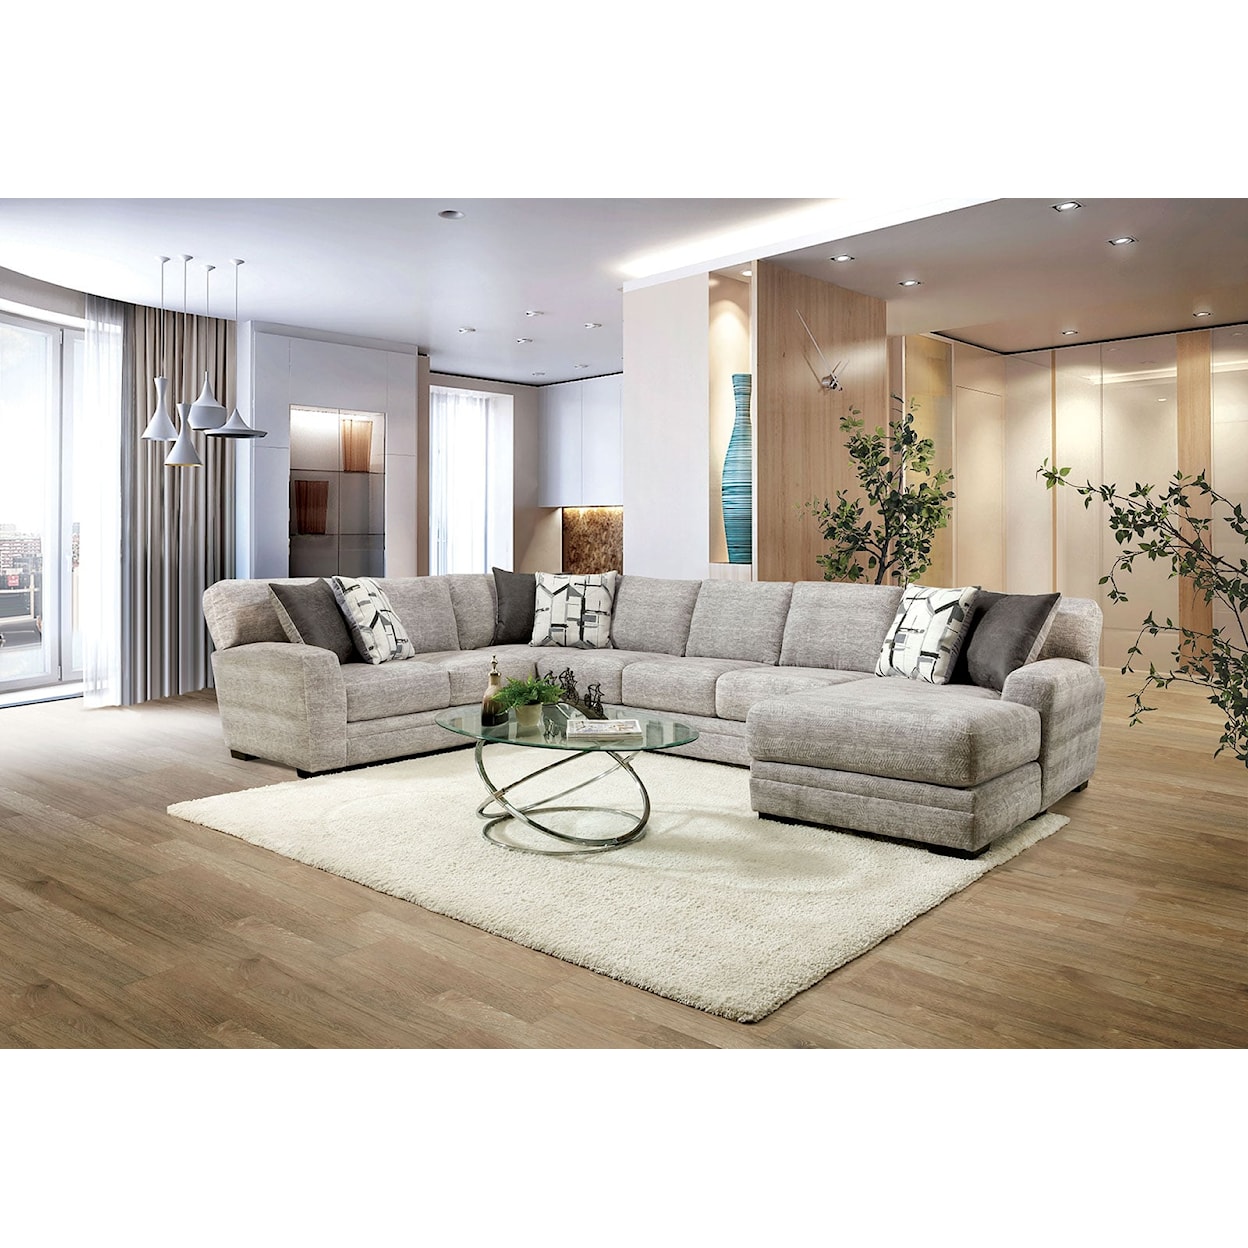 Furniture of America Walthamstow 3-Piece Sectional Sofa